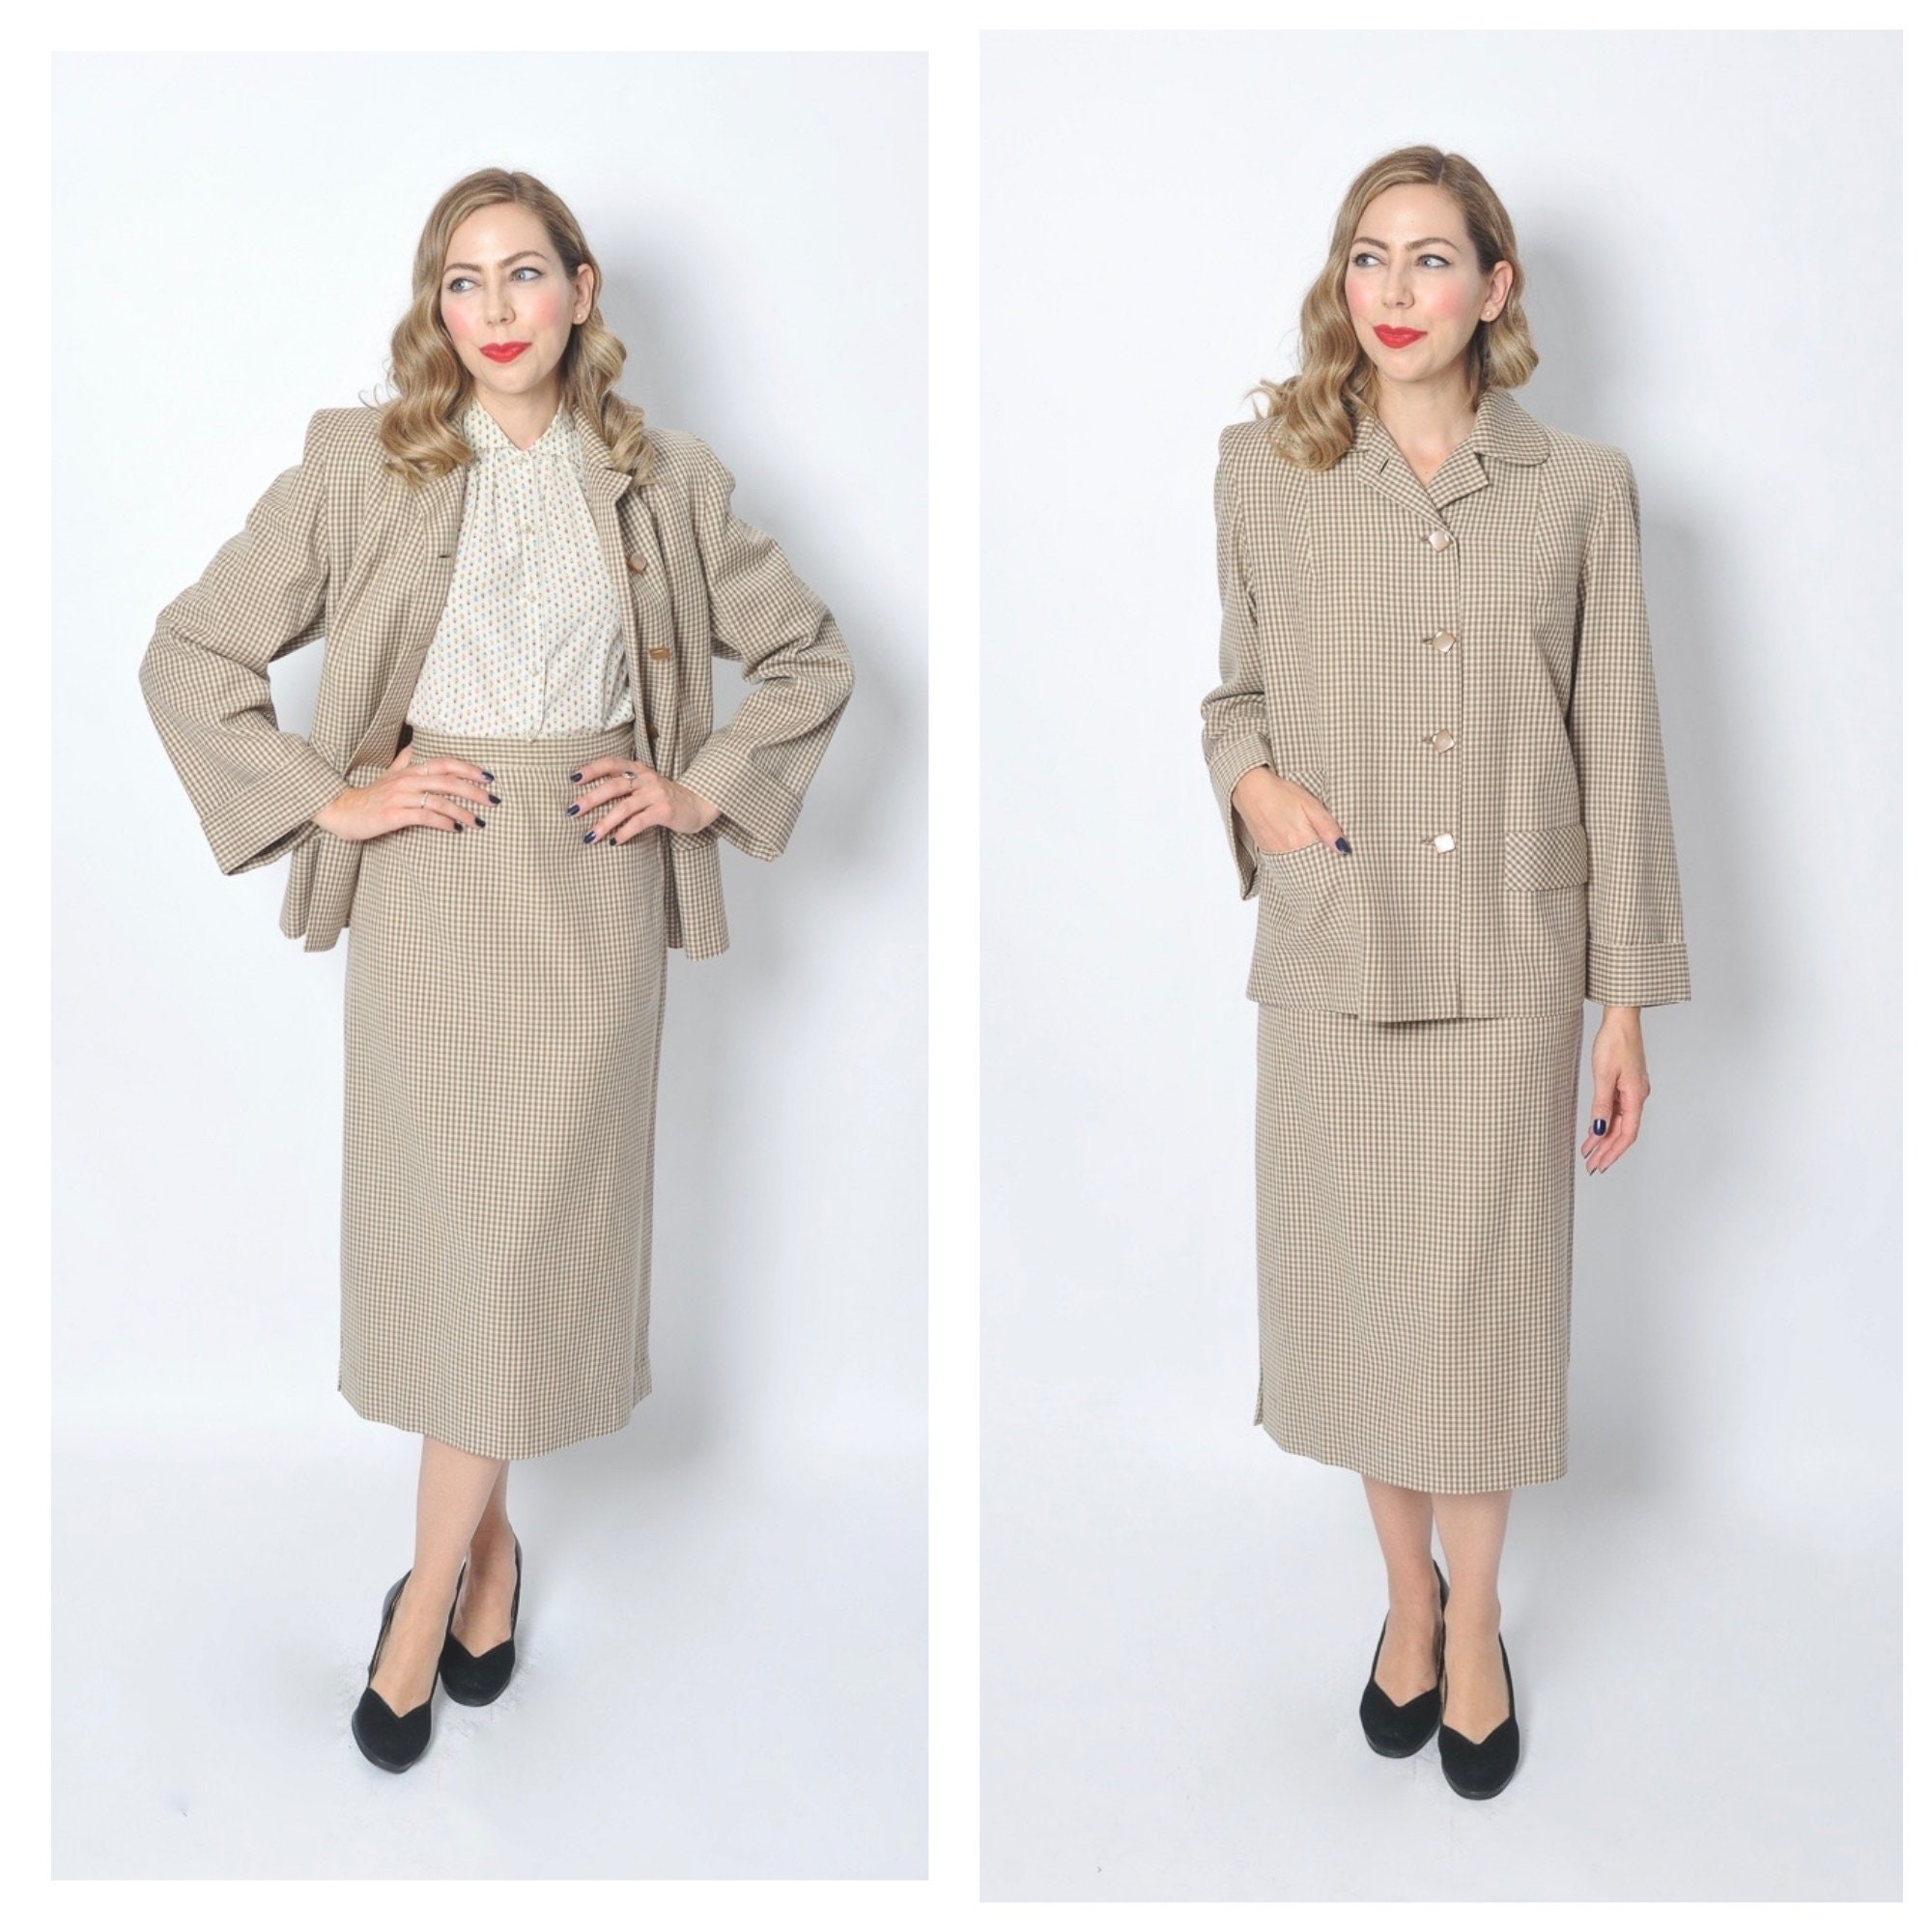 Real Vintage Search Engine 1940s Tattersall Check Cream Suit 40s Swing Coat  Skirt Set Size Small $141.20 AT vintagedancer.com